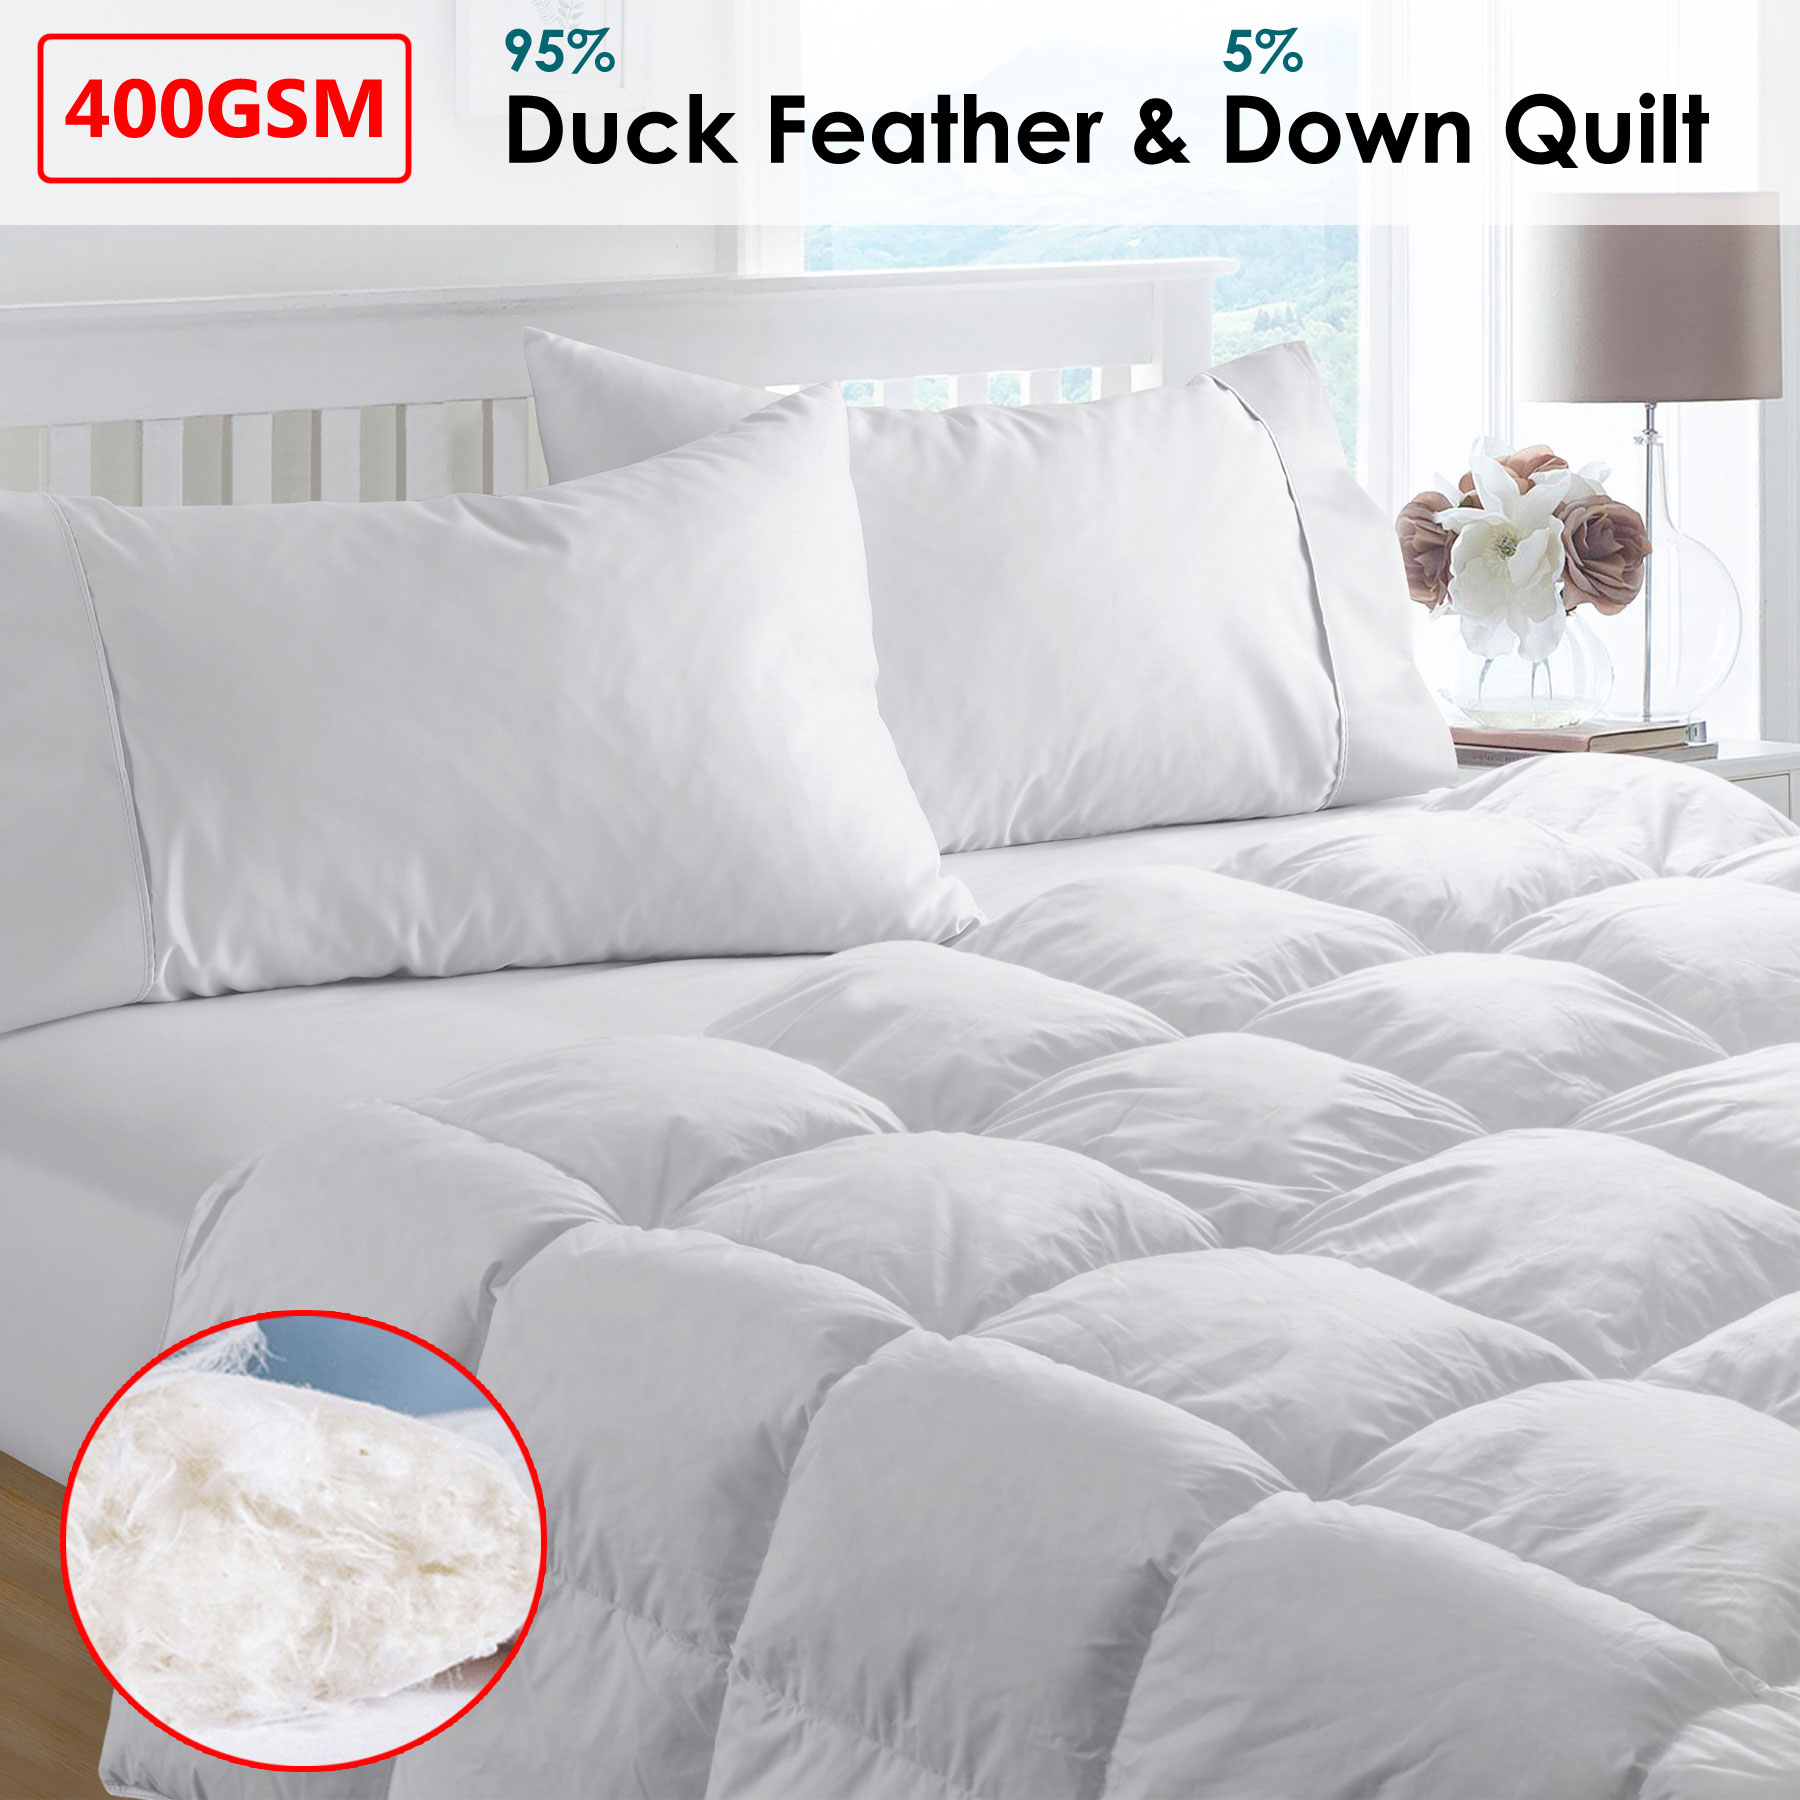 duck and down quilt